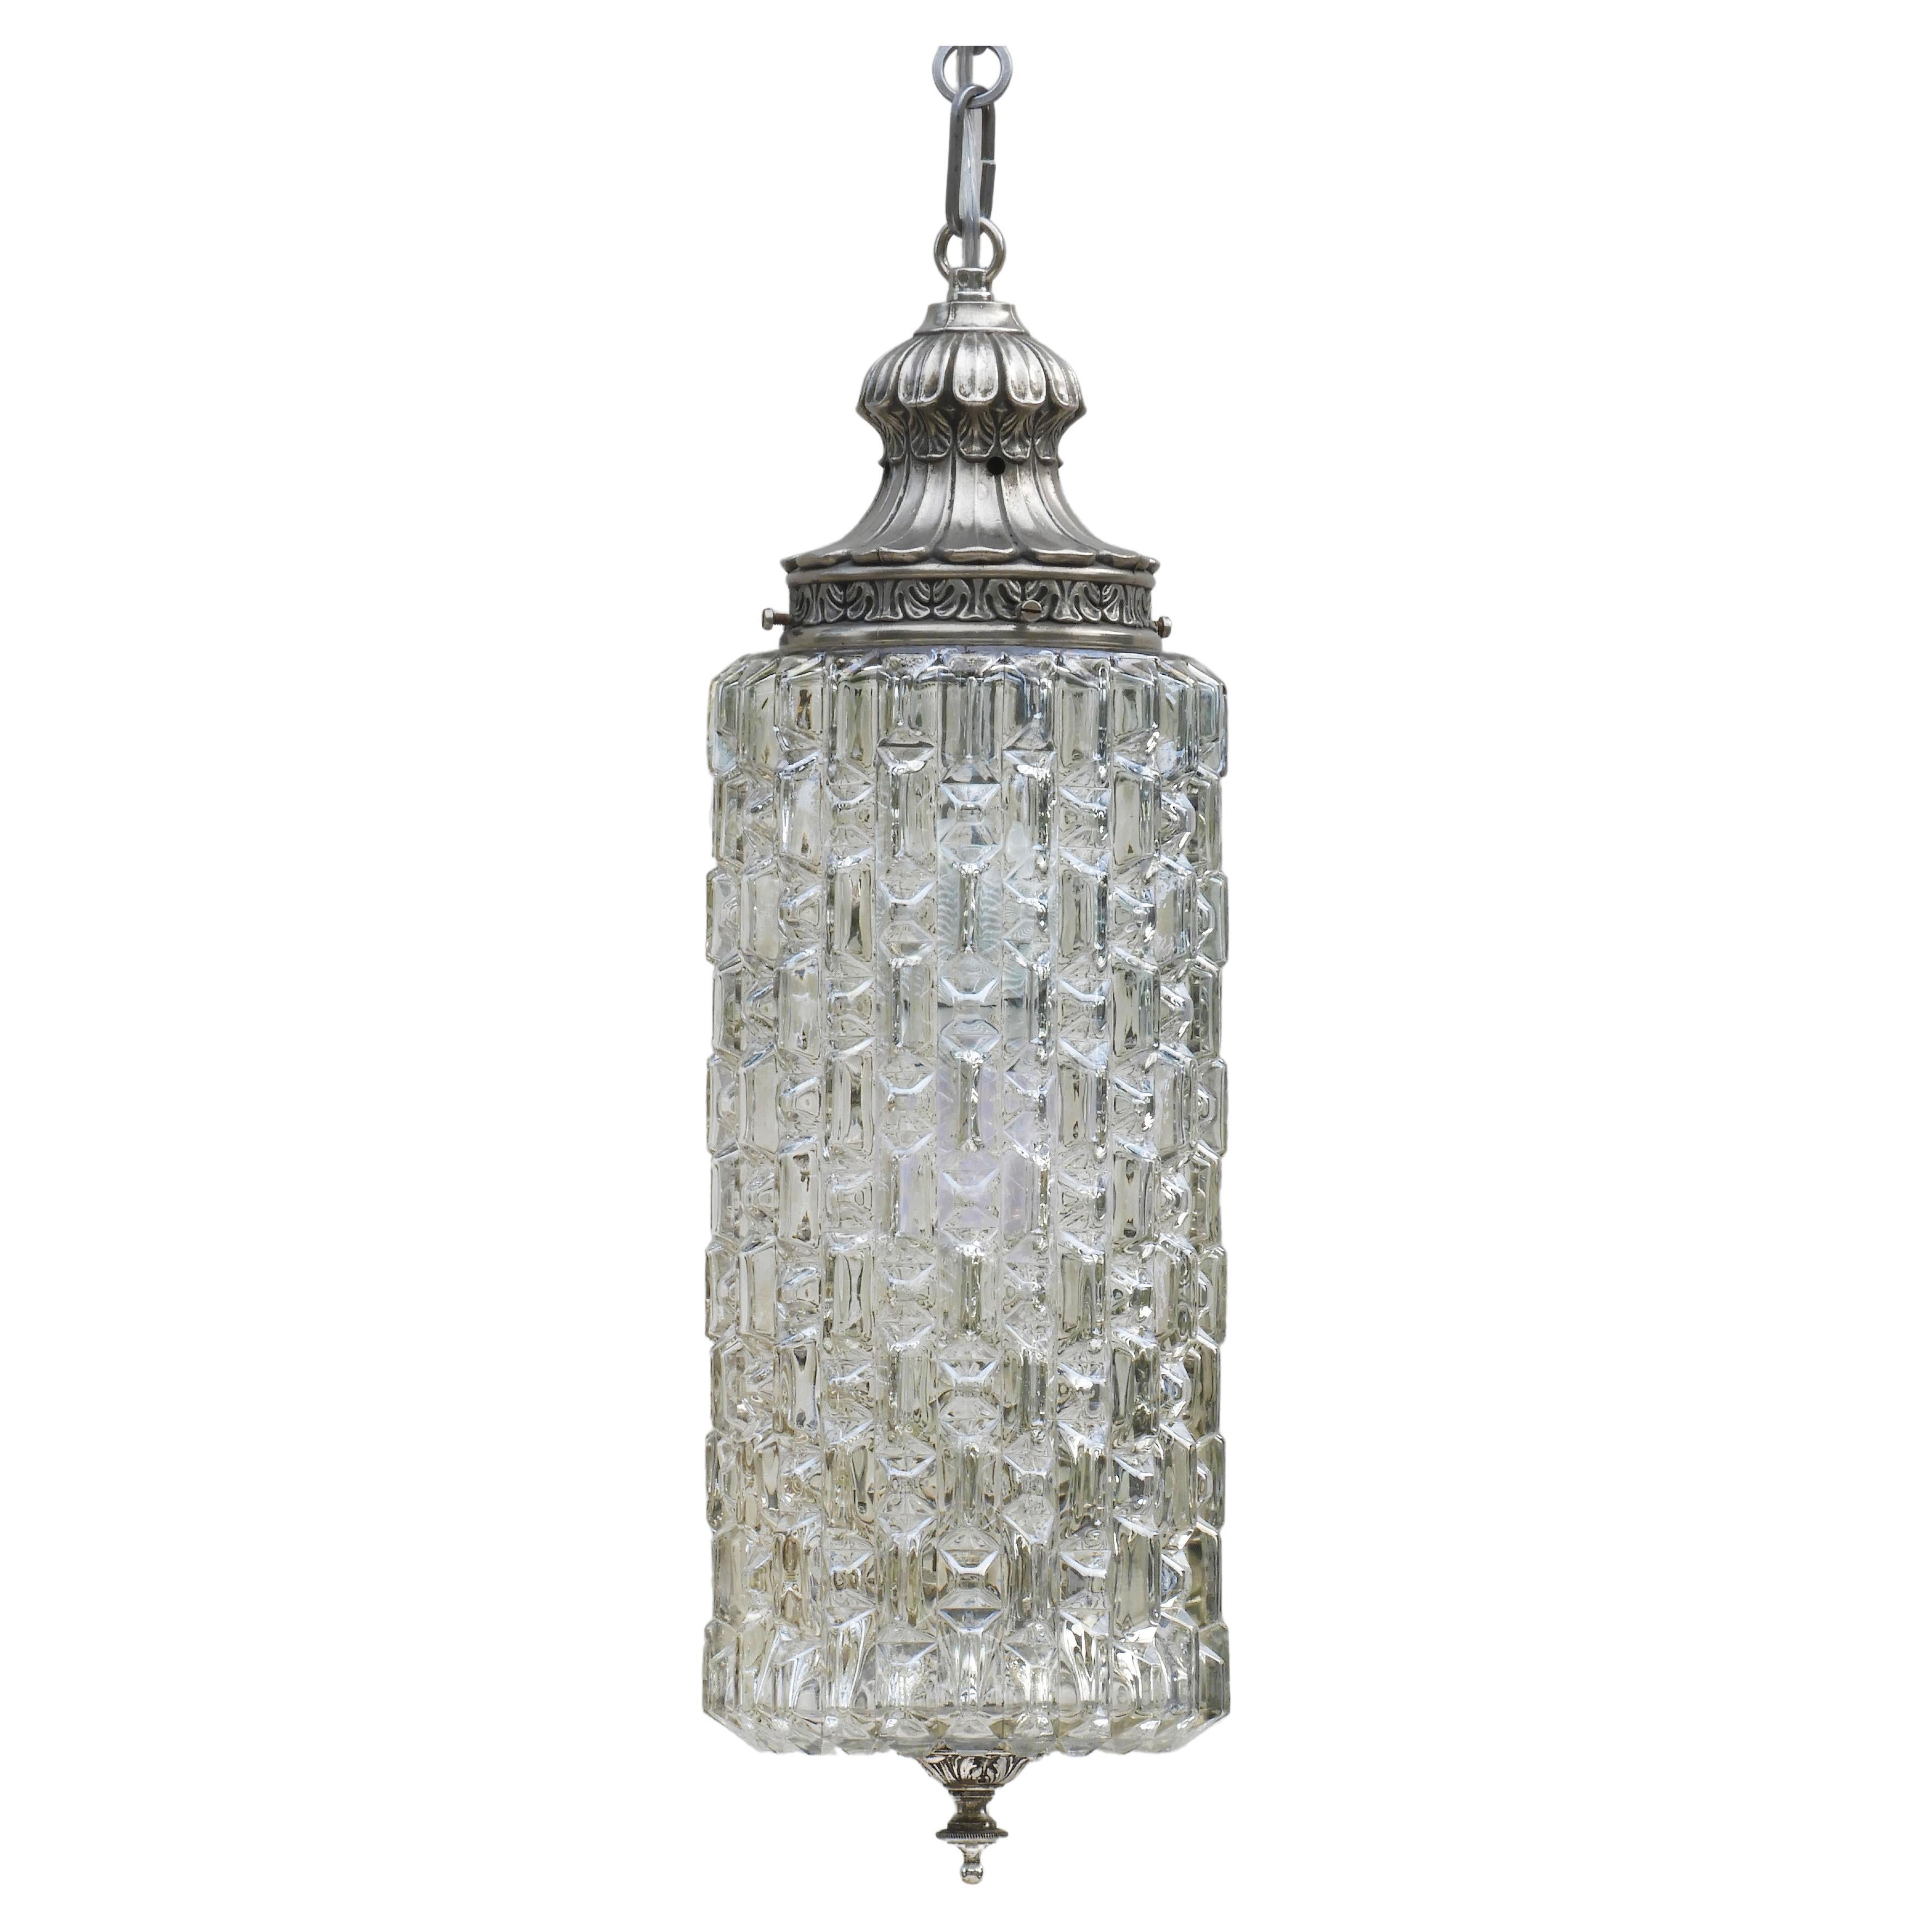 Beautiful mid-century glass pendant light lantern c1950 France. Unusual cylindrical glass lantern, heavily textured with a subtle iridescent shine. In very good vintage condition with nice patina and no losses to glass. Rewired with all new